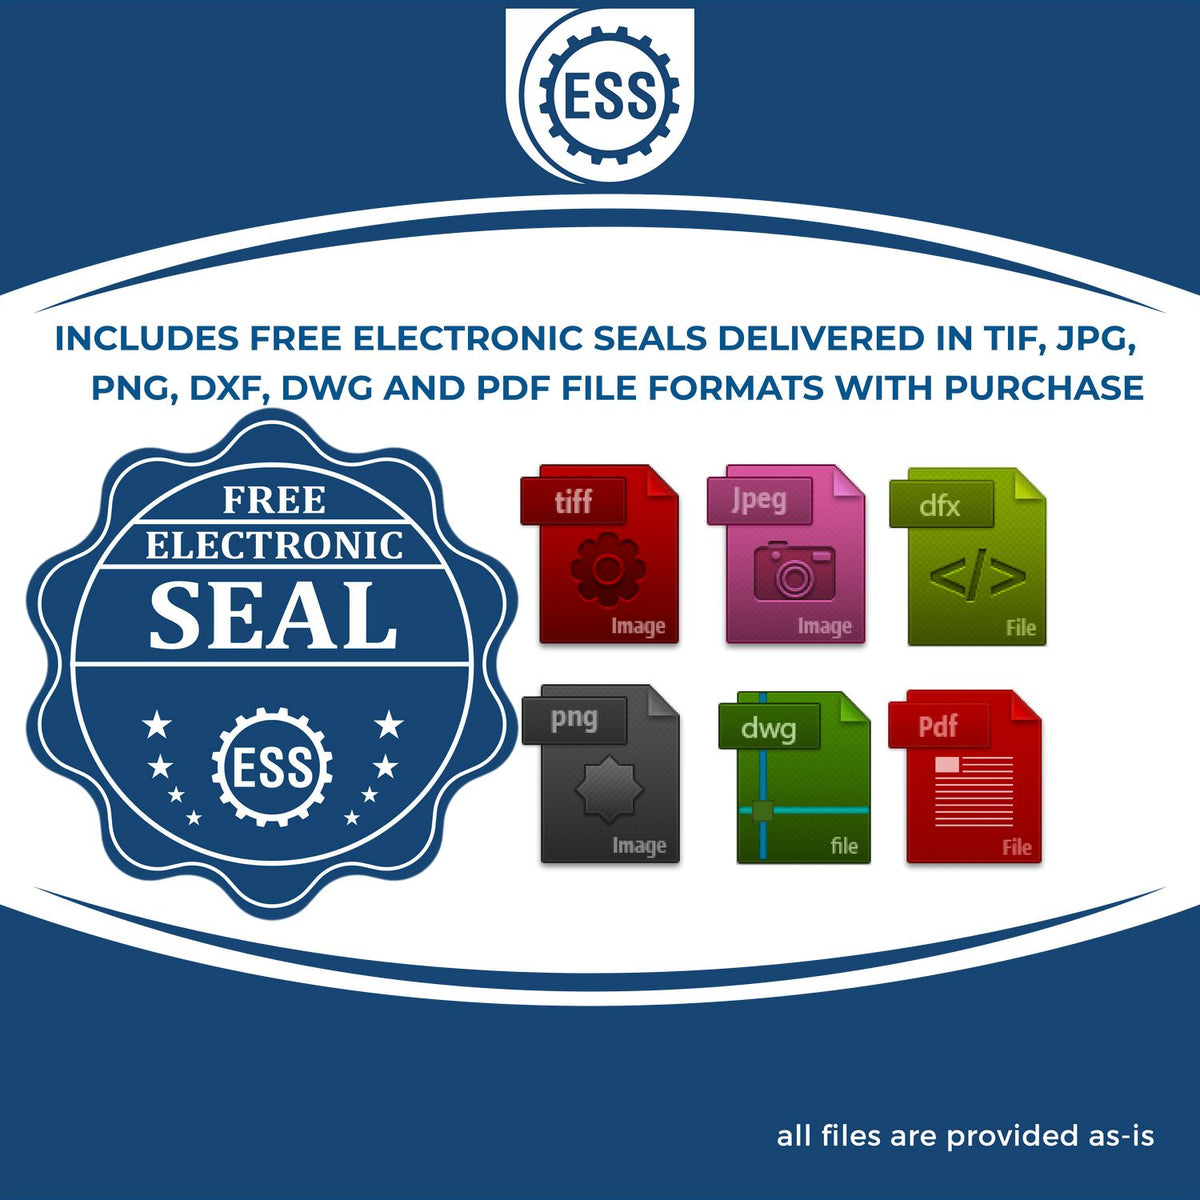 An infographic for the free electronic seal for the Soft Texas Professional Engineer Seal illustrating the different file type icons such as DXF, DWG, TIF, JPG and PNG.